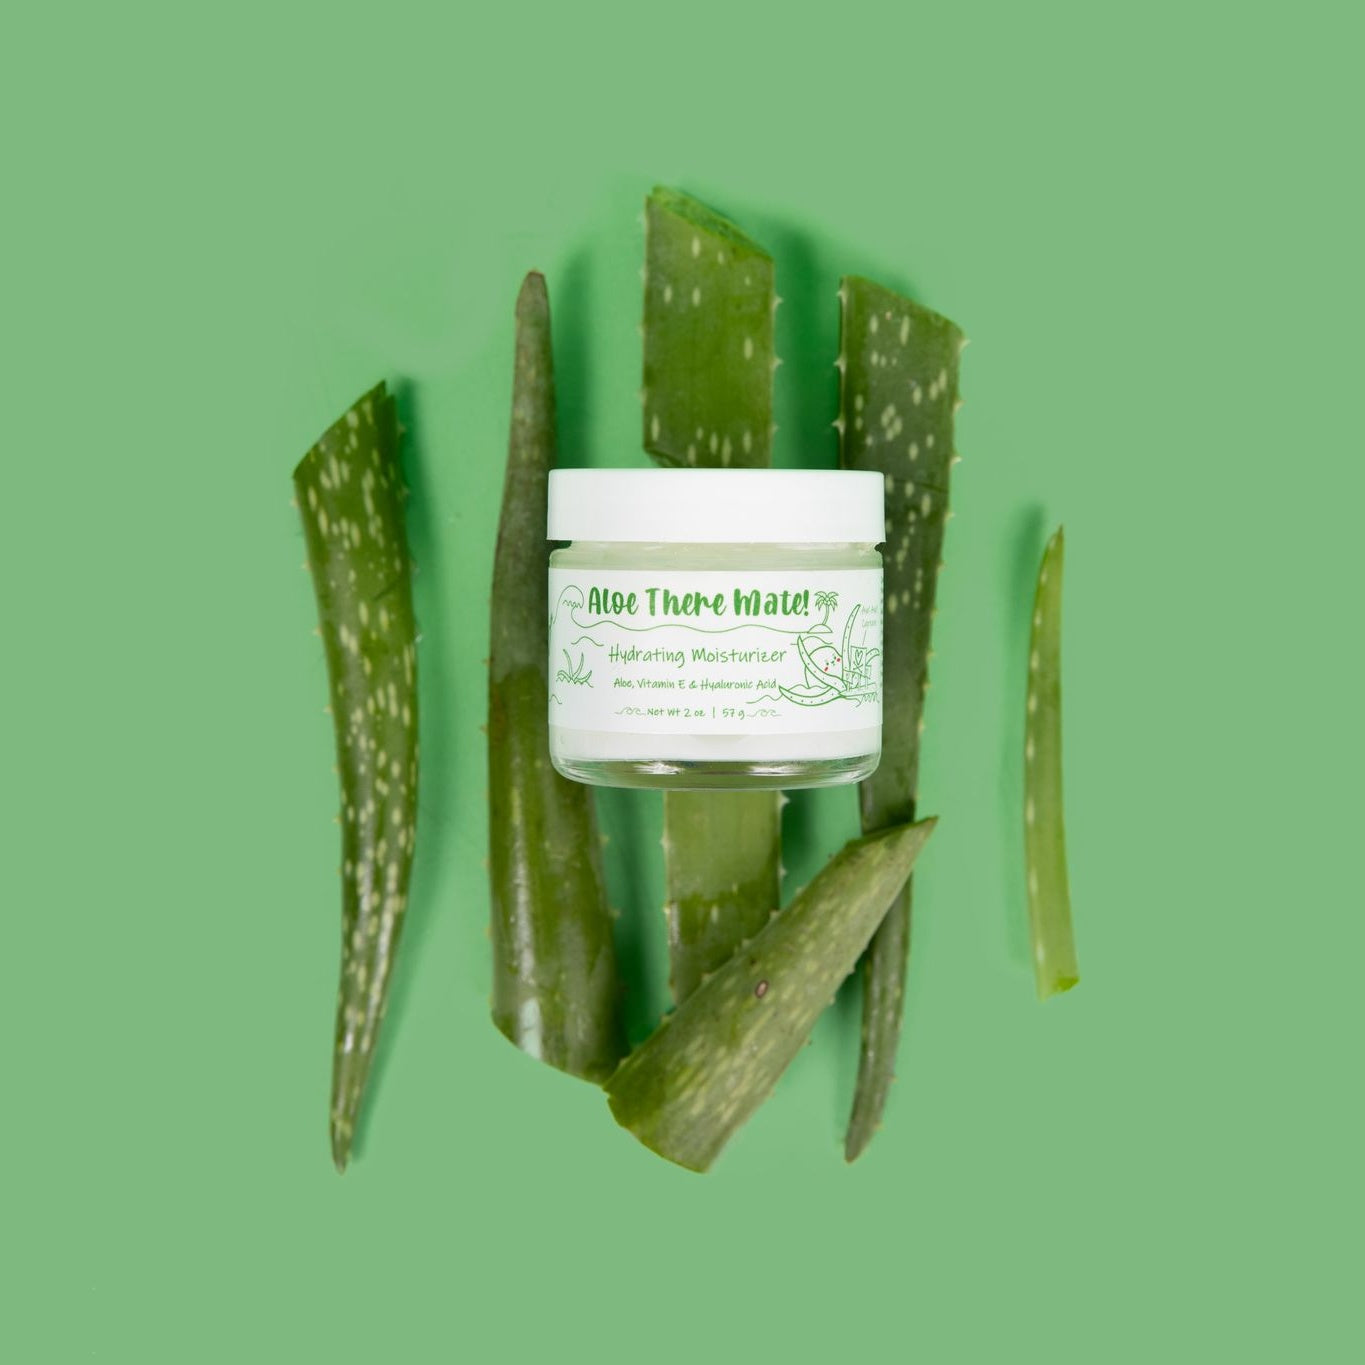 Aloe There Mate! - Hydrating Moisturizer